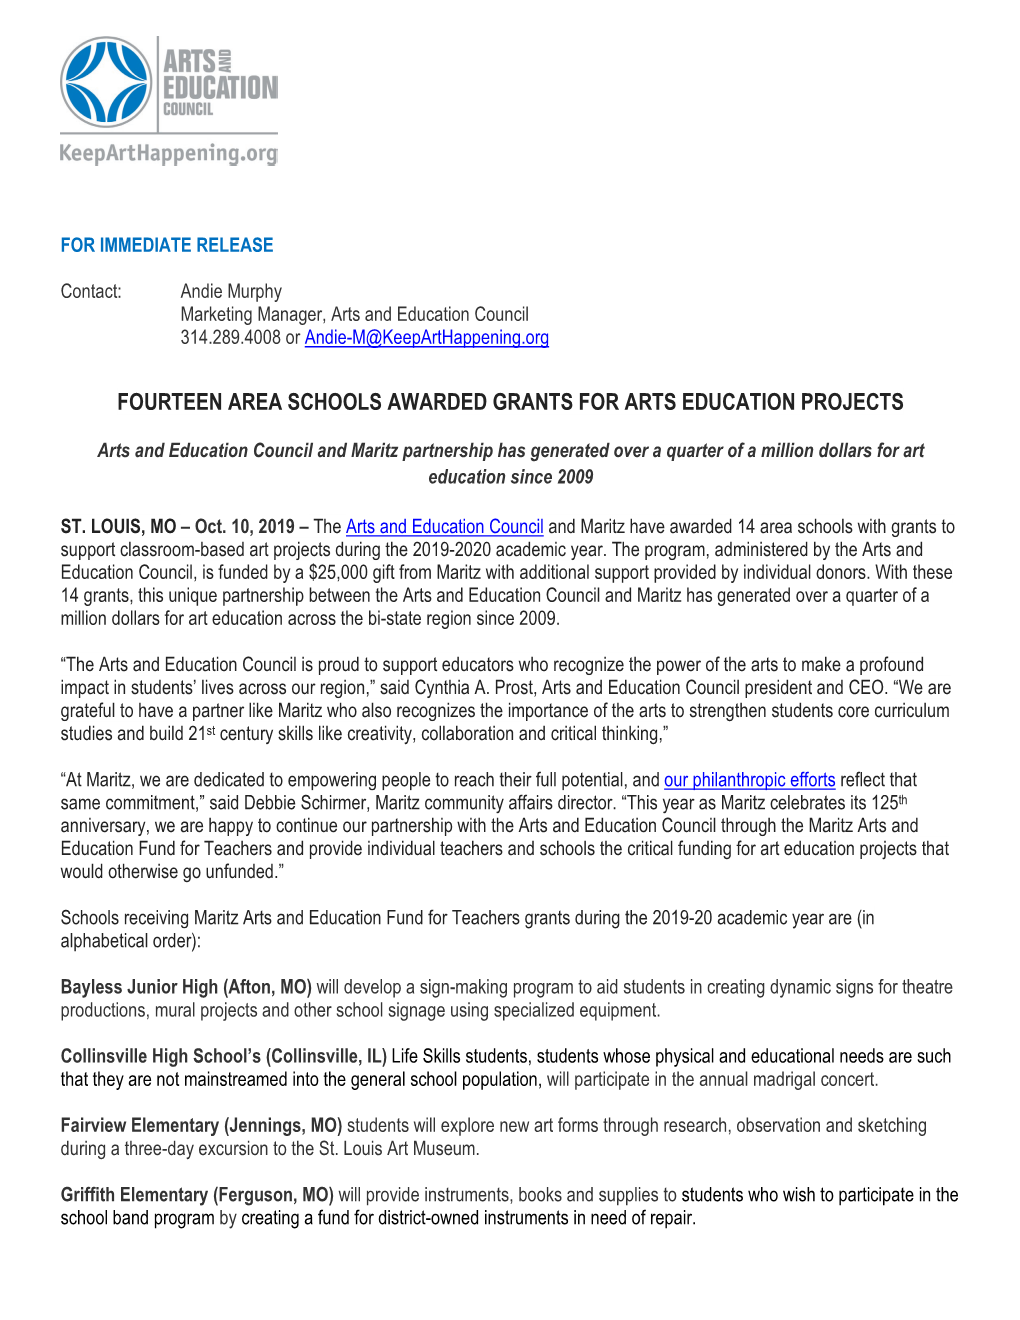 Press Release from the Arts and Education Council